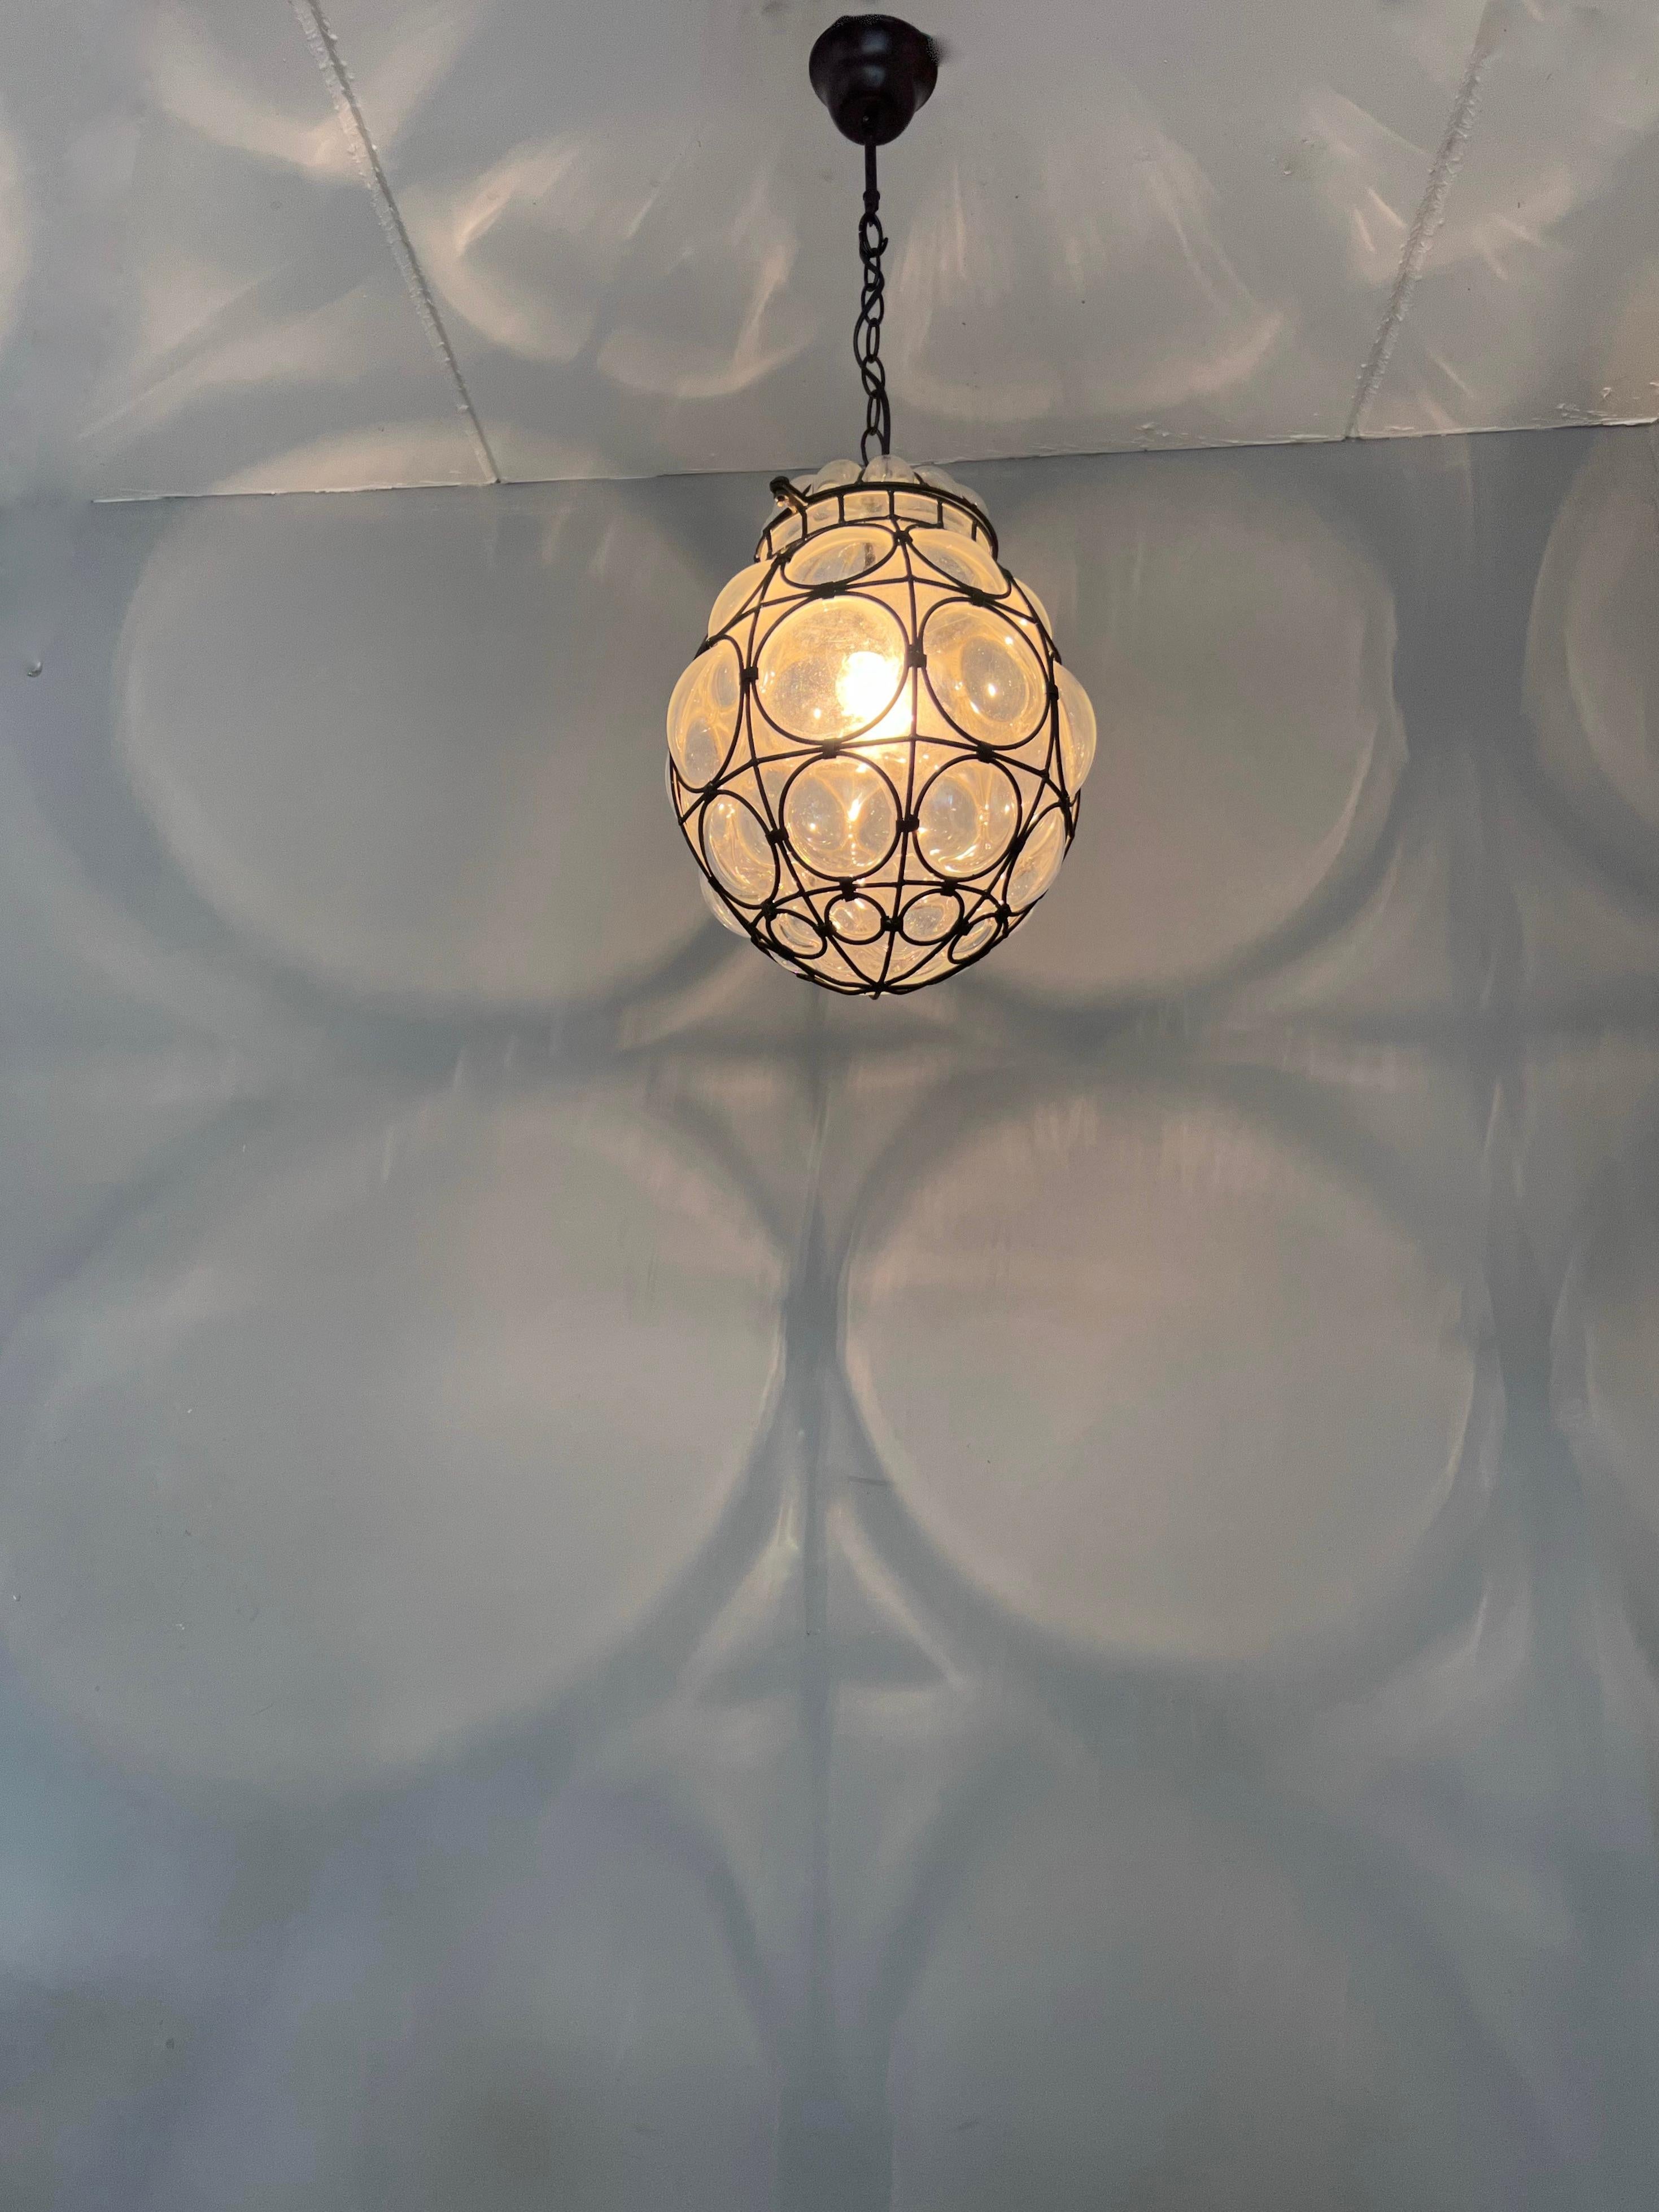 Italian Good Size Venetian Mouth Blown Glass in Hand-Crafted Metal Frame Pendant Light For Sale